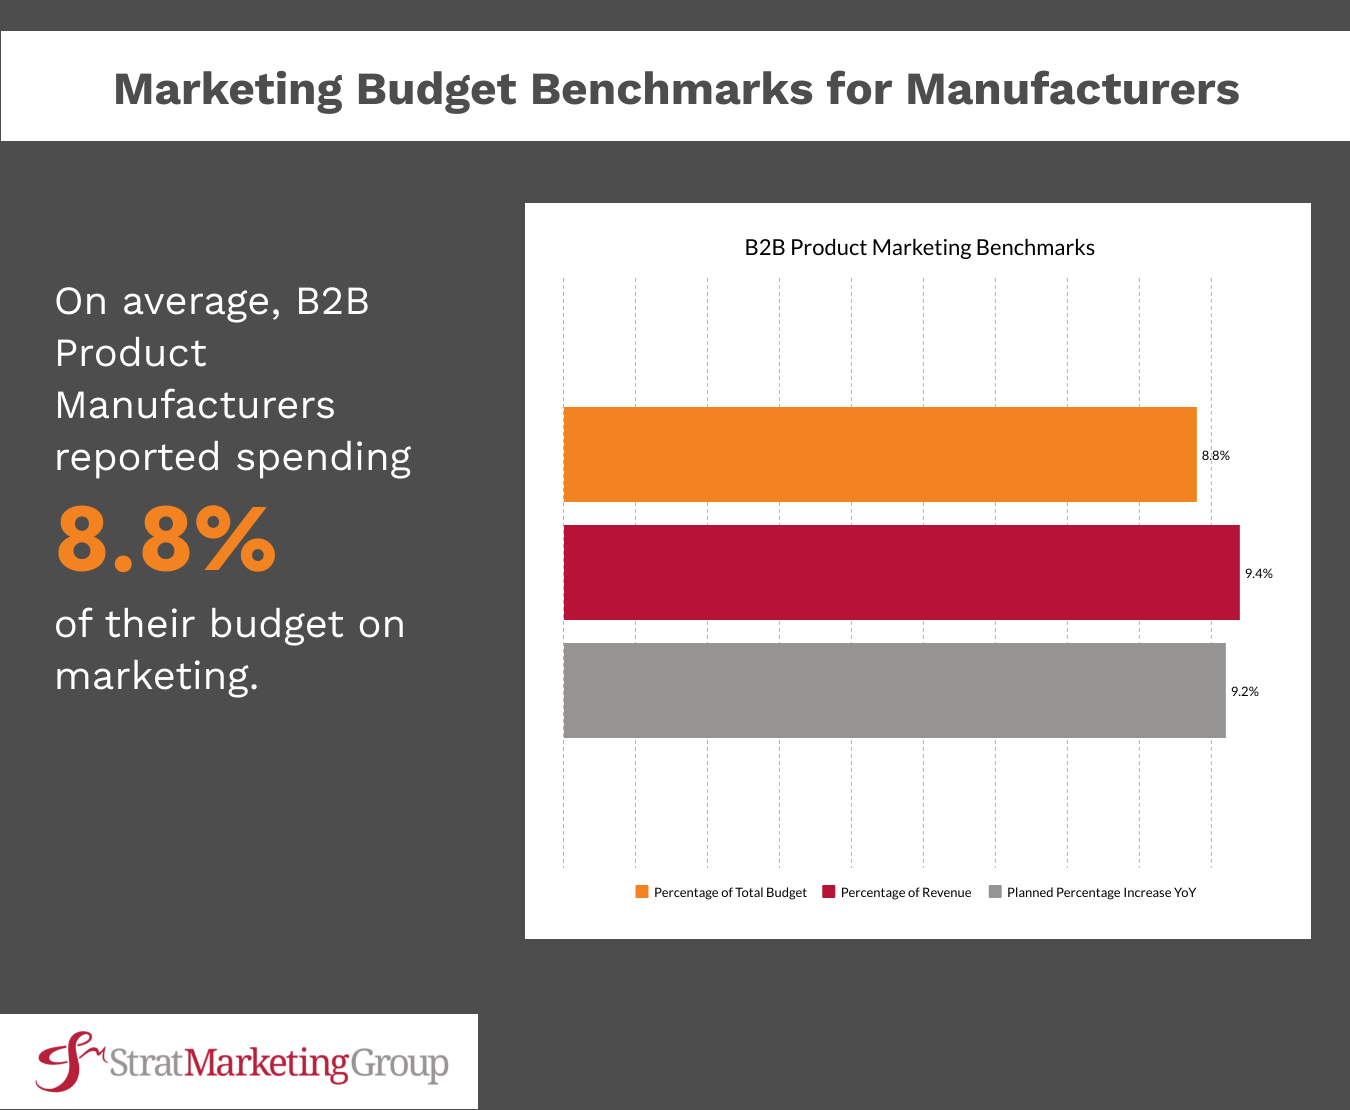 Marketing budget benchmarks for manufacturers covered in the article are shown in a bar chart